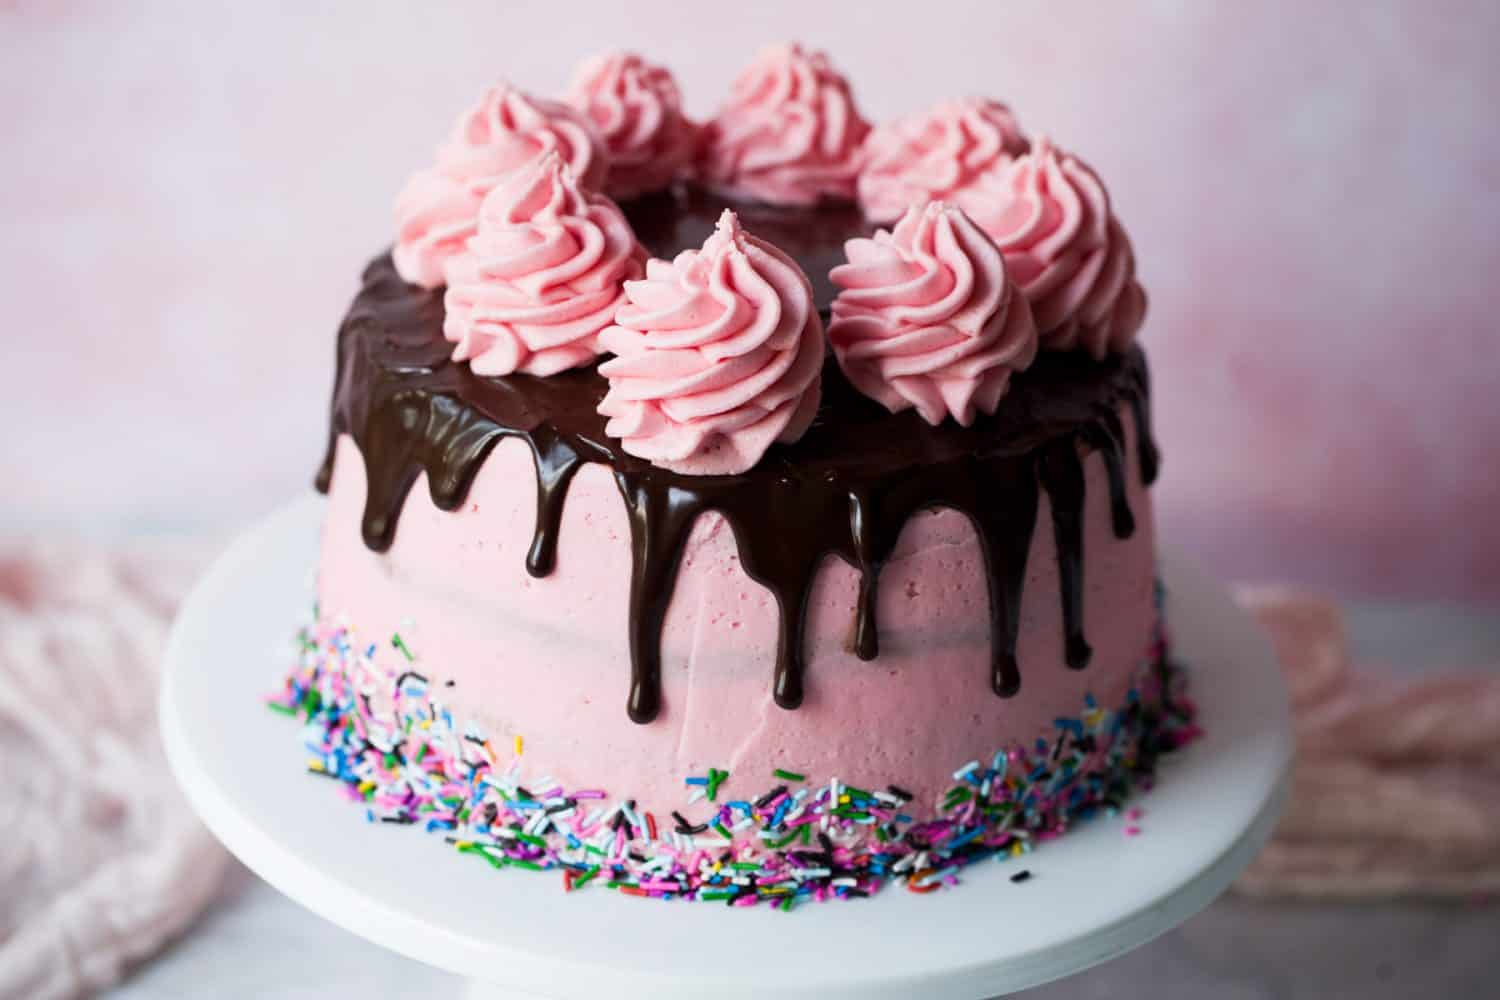 A DIY Drip cake with pink buttercream frosting. 